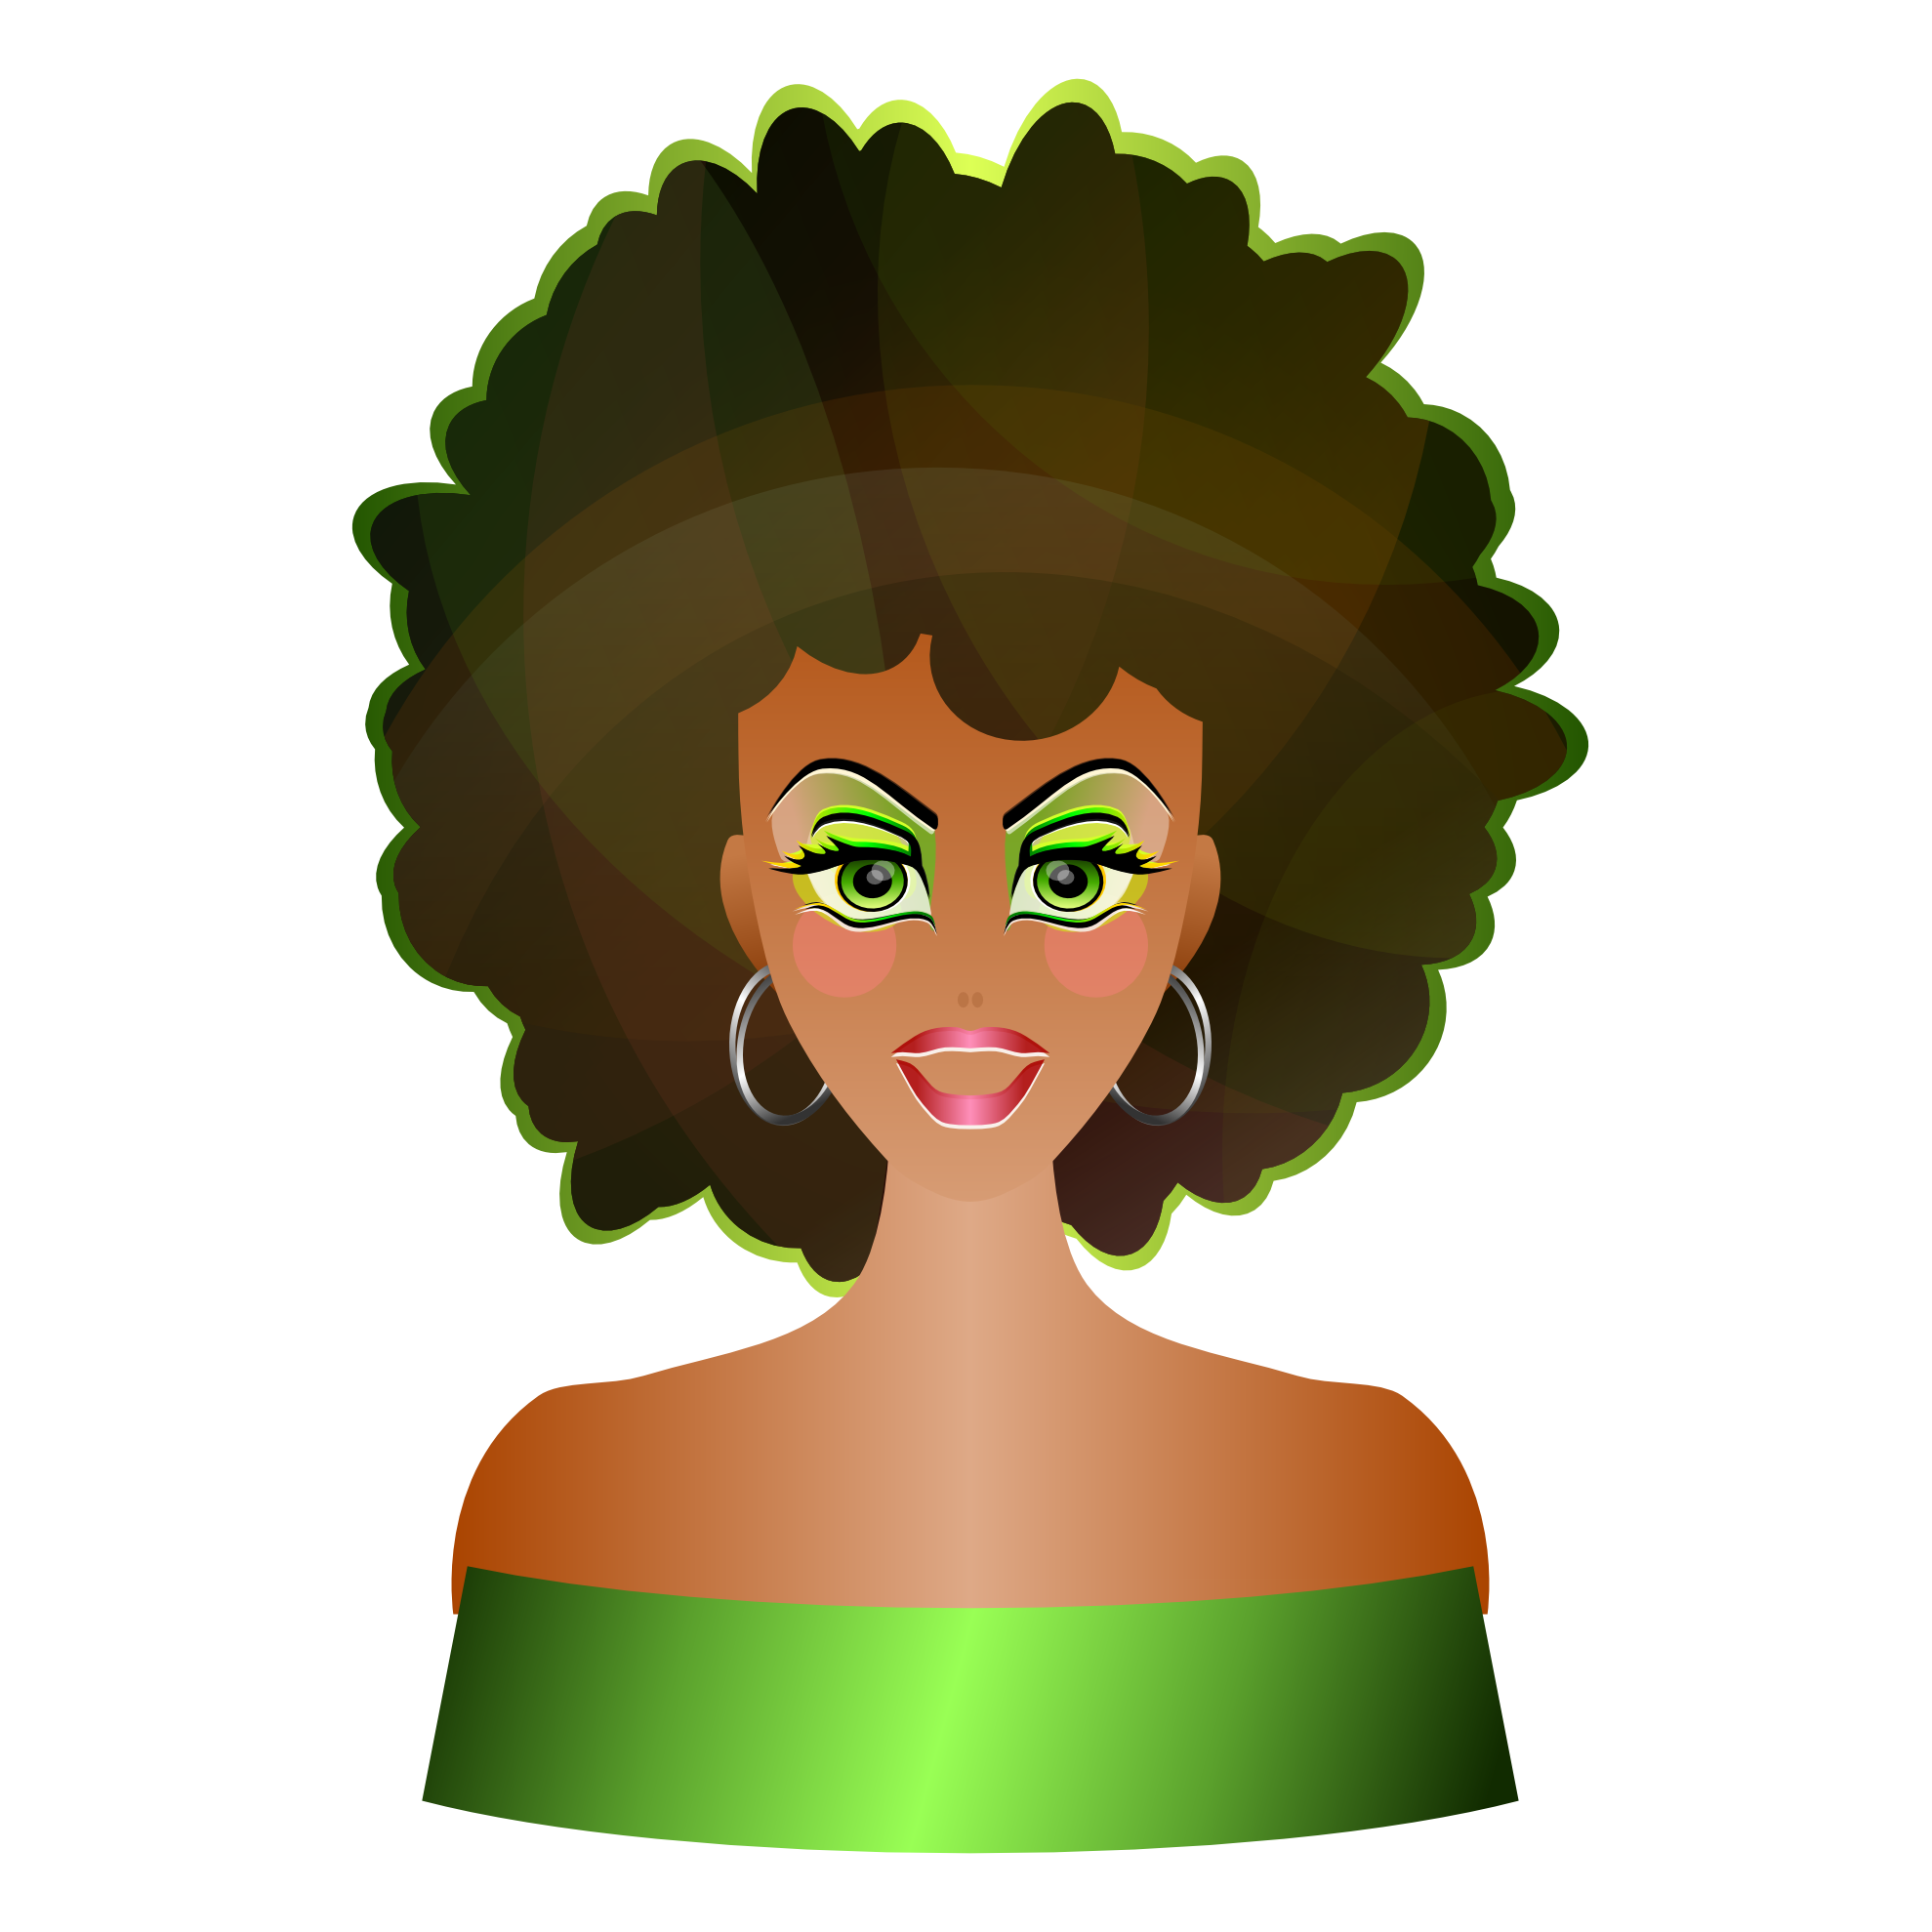 Free Afro Hair Clipart, Download Free Afro Hair Clipart png images